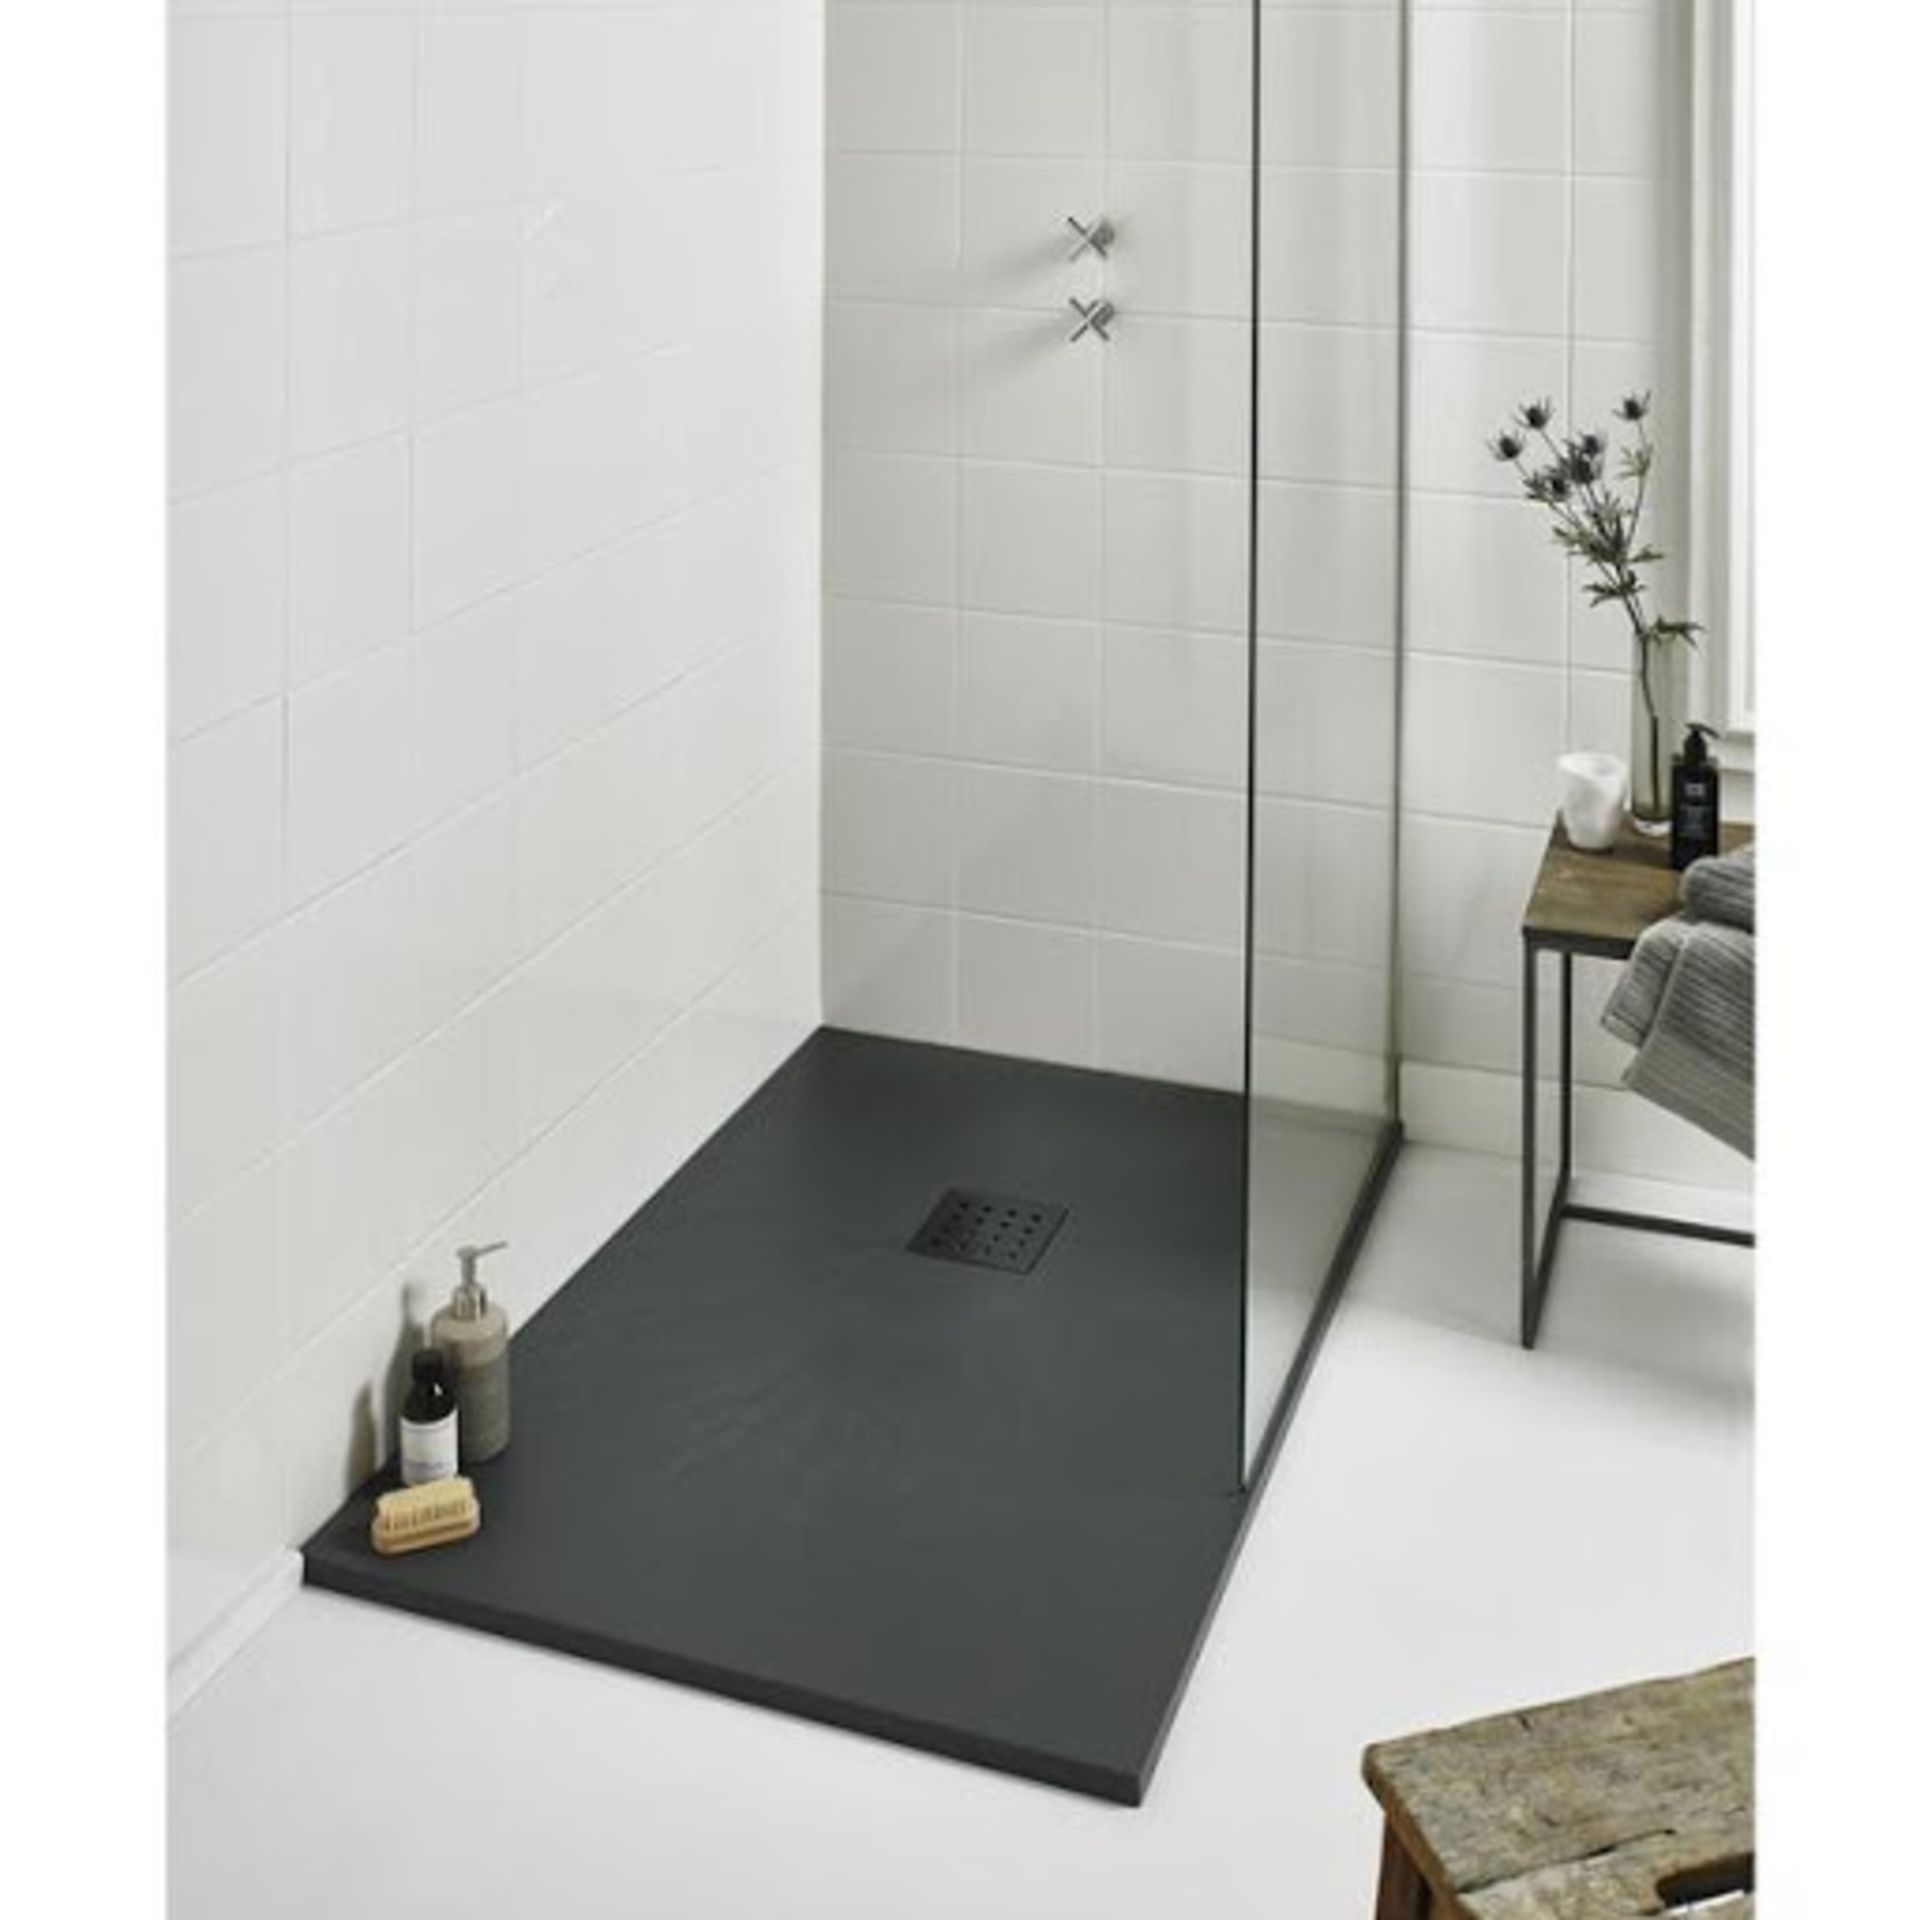 New 1000x800mm Rectangle Black Slate Effect Shower Tray. RRP £569.99.A Textured Black Slate Effect